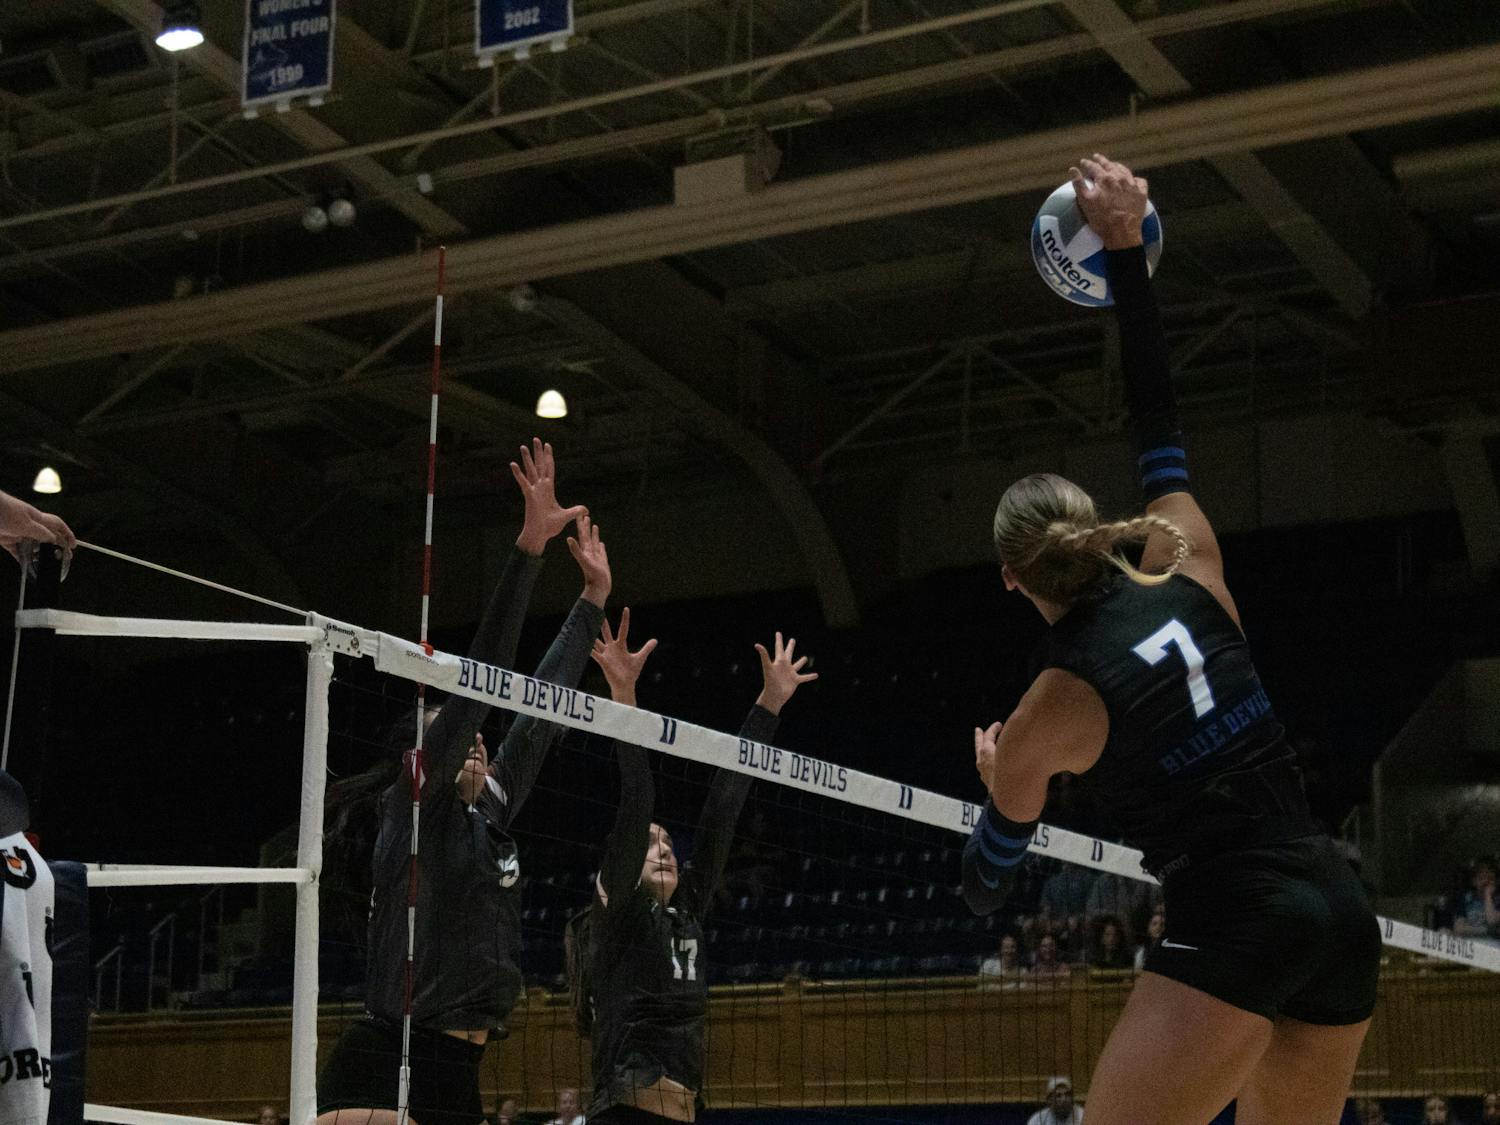 Graduate student Gracie Johnson leaps up to hit the ball during Duke's match with Santa Clara.